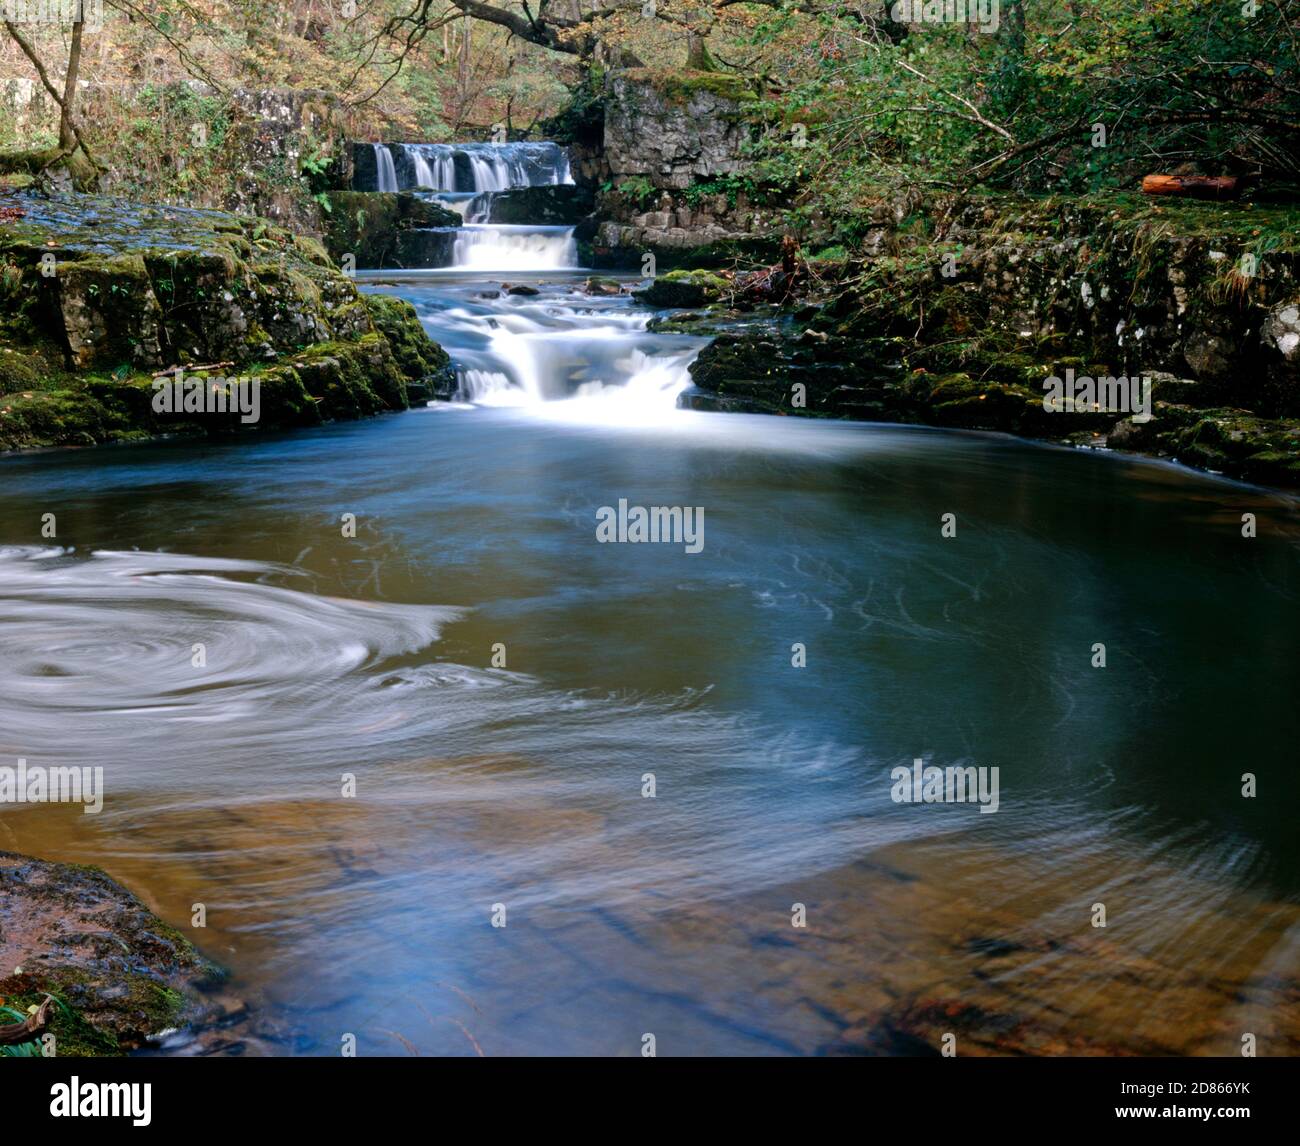 Cascate sul fiume Nedd, Upper Neath Valley, Brecon Beacons National Park, Powys, Galles. Foto Stock